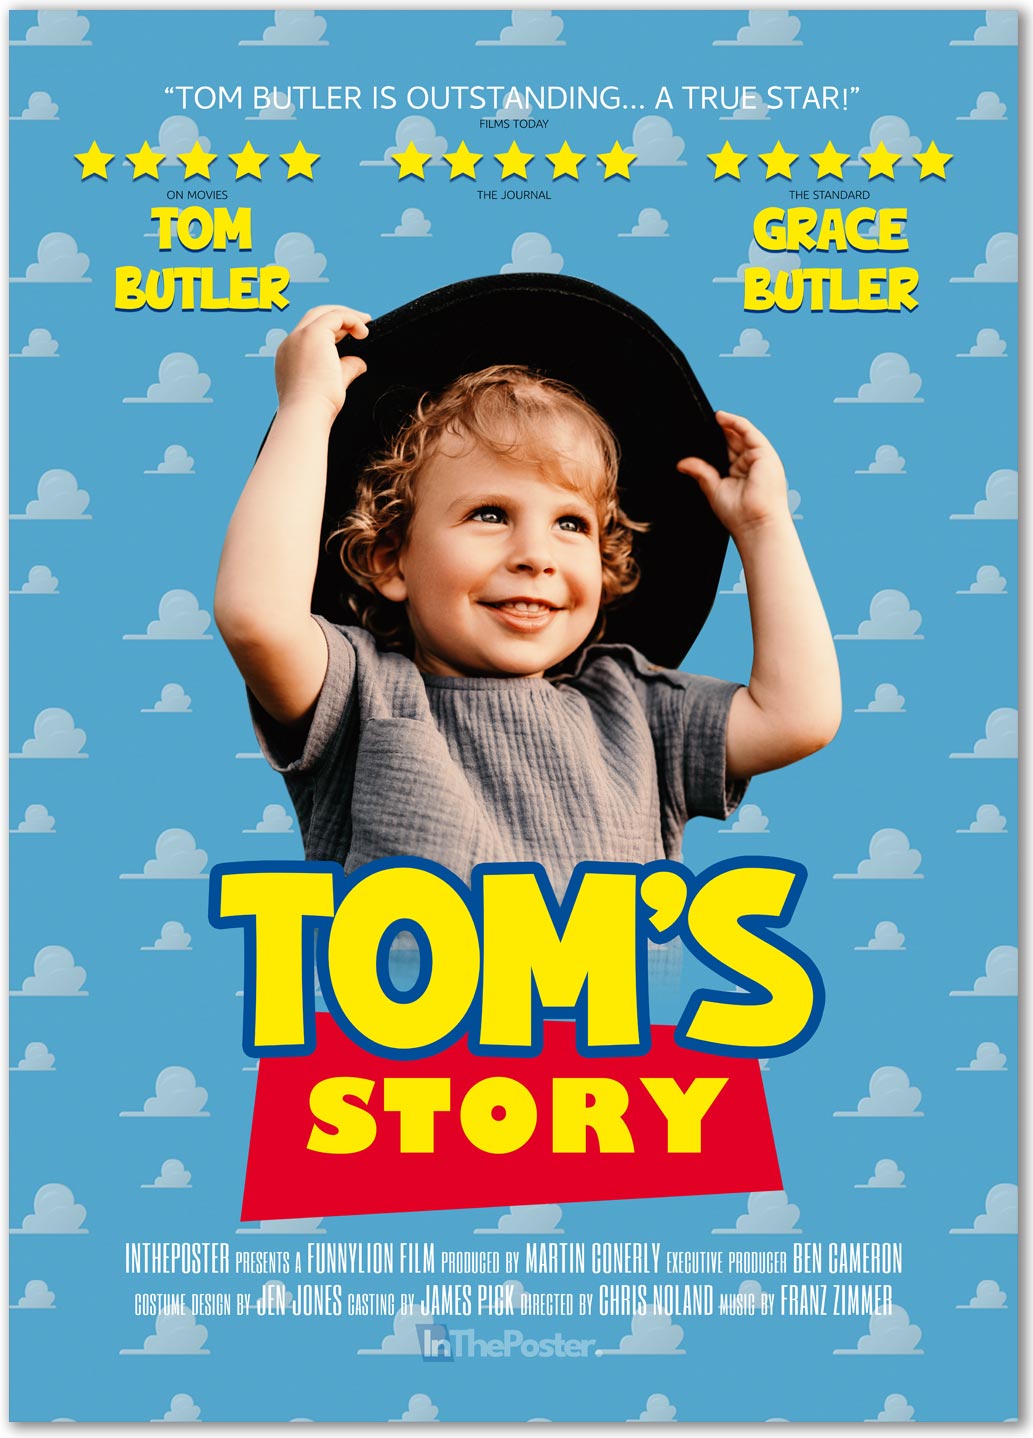 Classic Animated Film Inspired Movie Poster with blue clouds and a happy body wearing a cowboy hat. Yellow text saying &#39;Tom&#39;s Story&#39;.